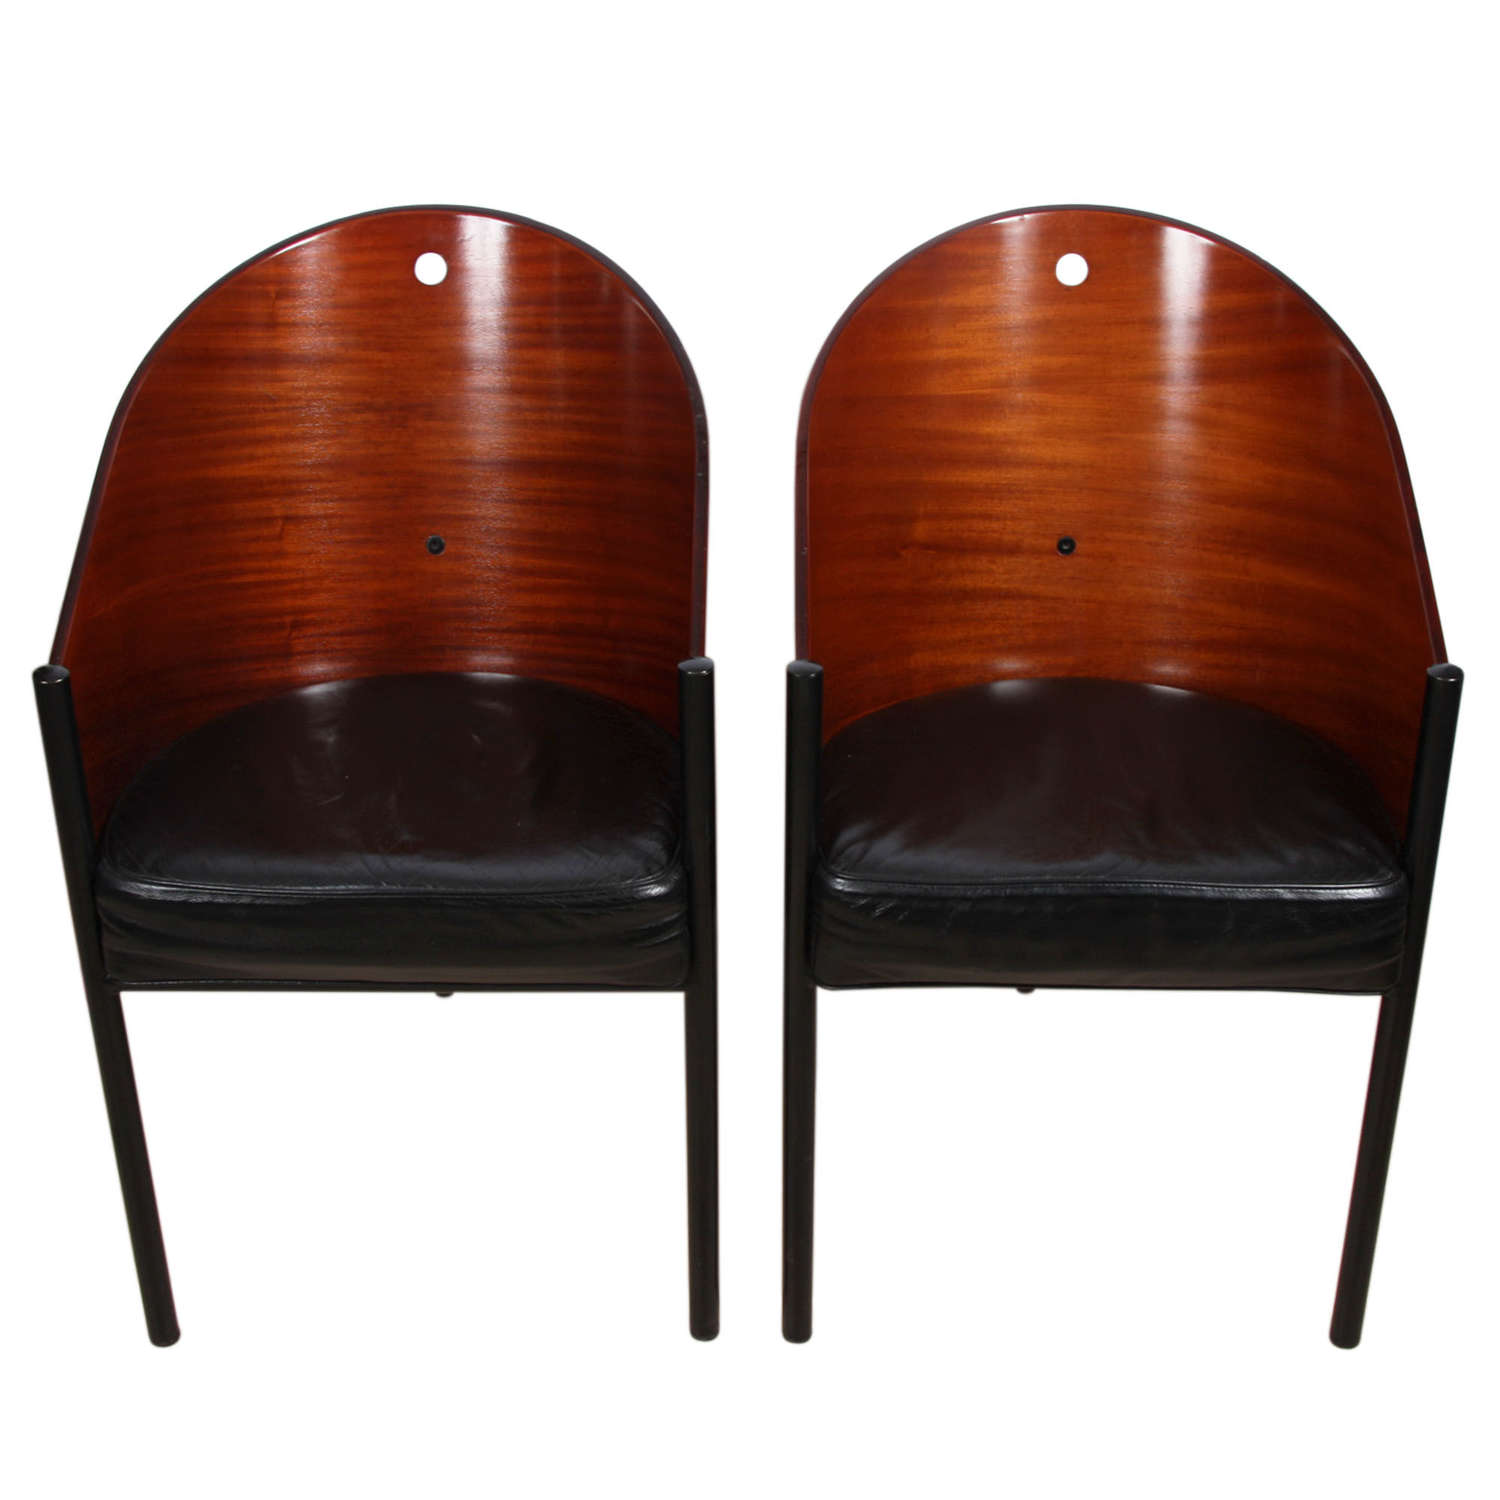 Set of 2 Phillippe Starck Wood & Leather Chairs for Costes Café Paris